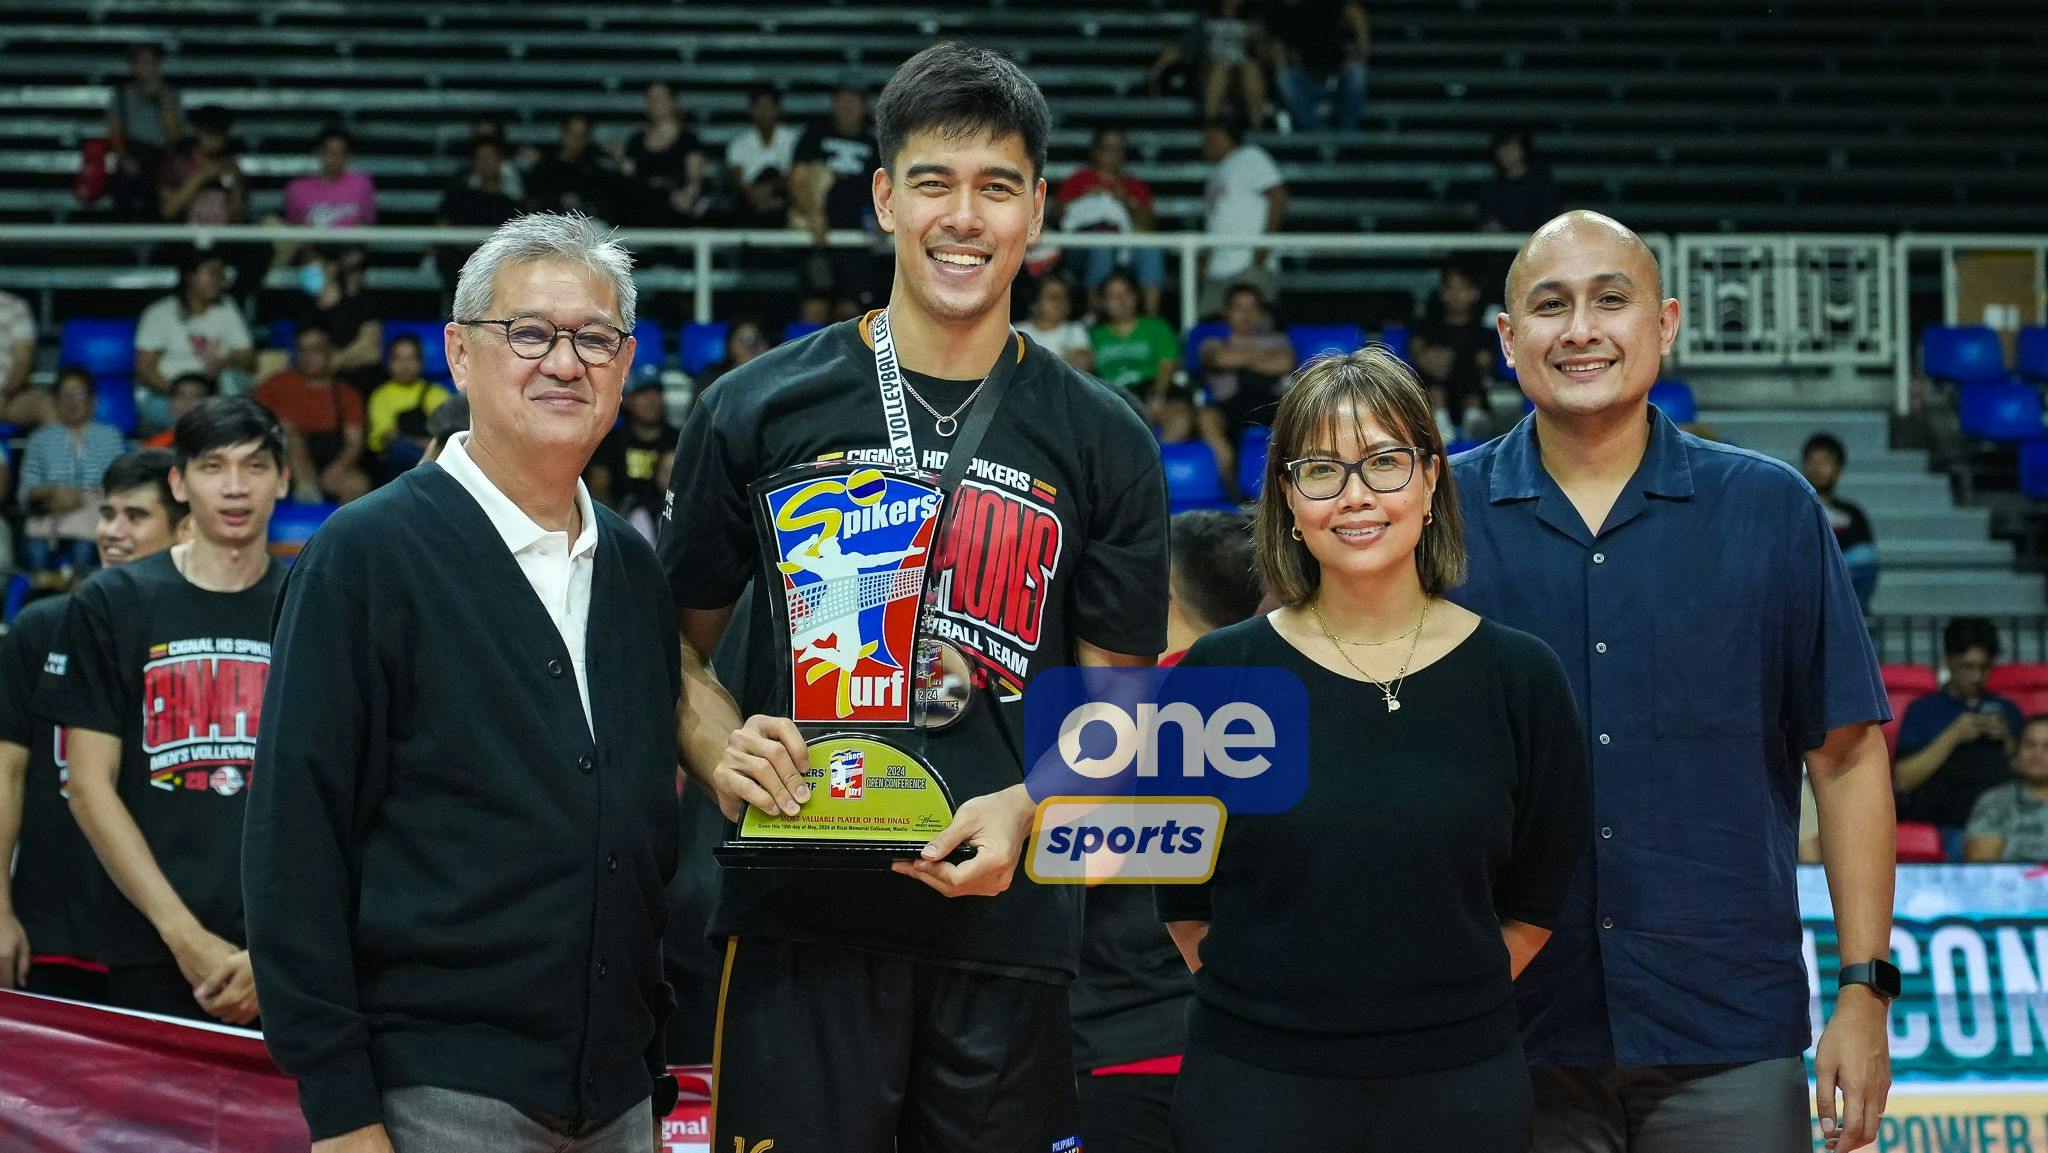 Spikers’ Turf: Finals MVP Bryan Bagunas relishes first title with Cignal
